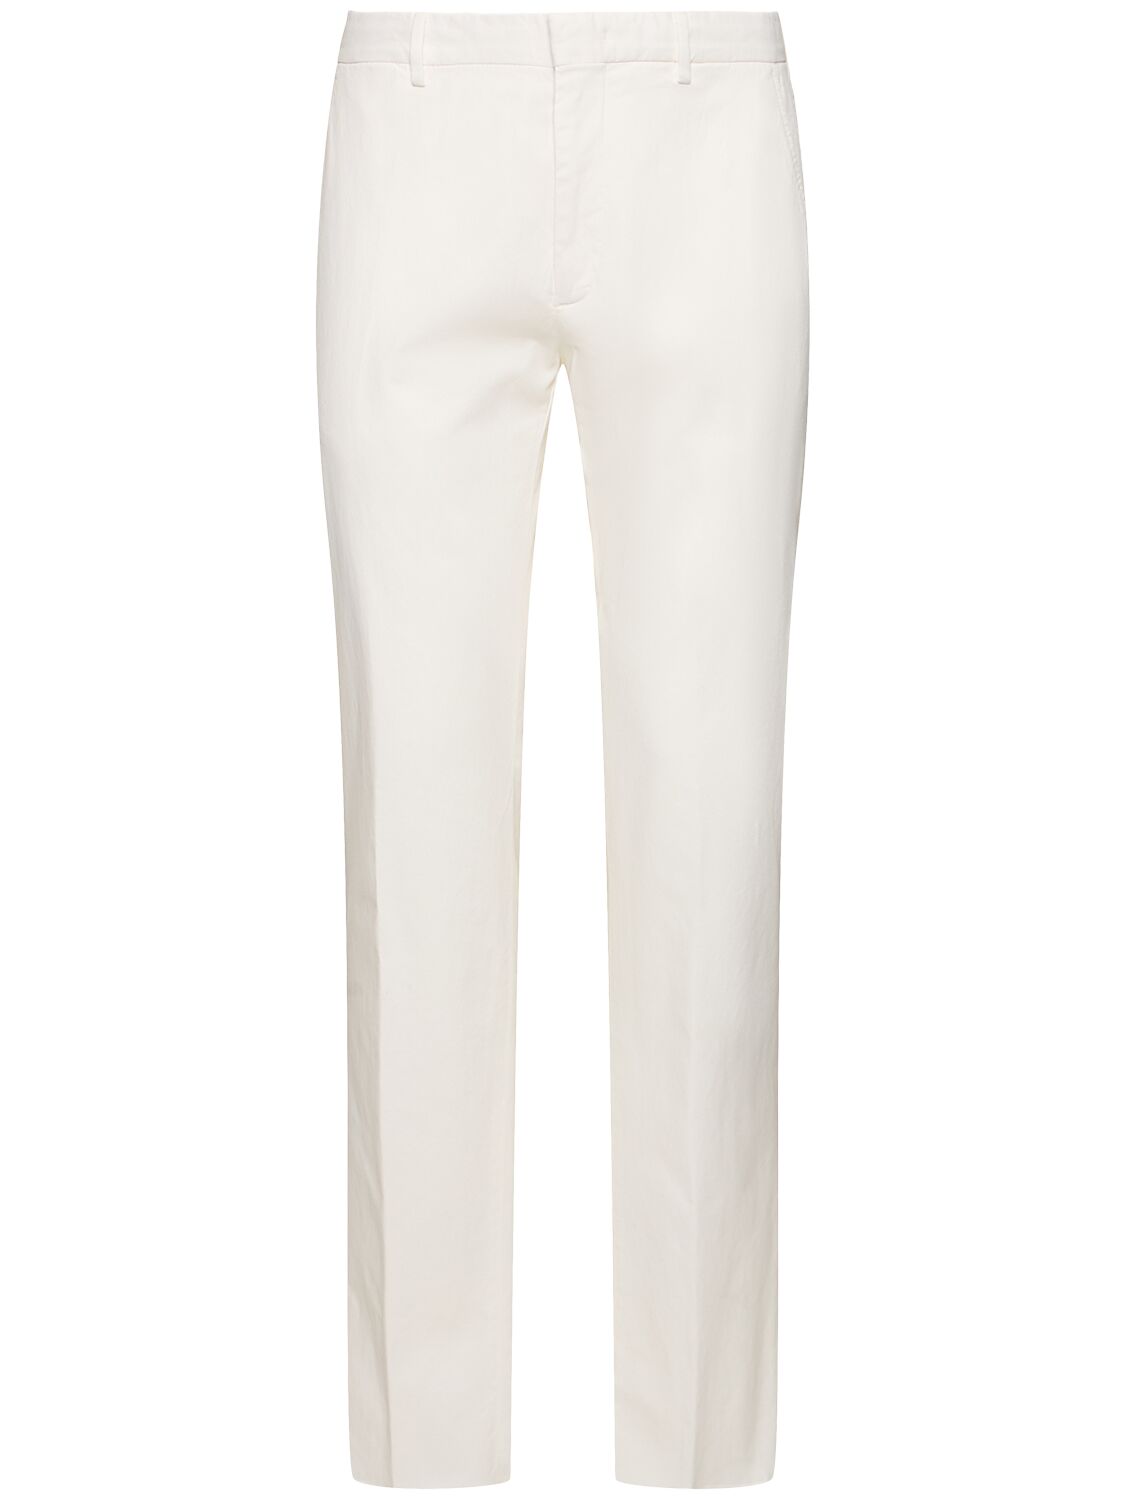 Zegna Garment Dyed Cotton Flat Front Pants In White